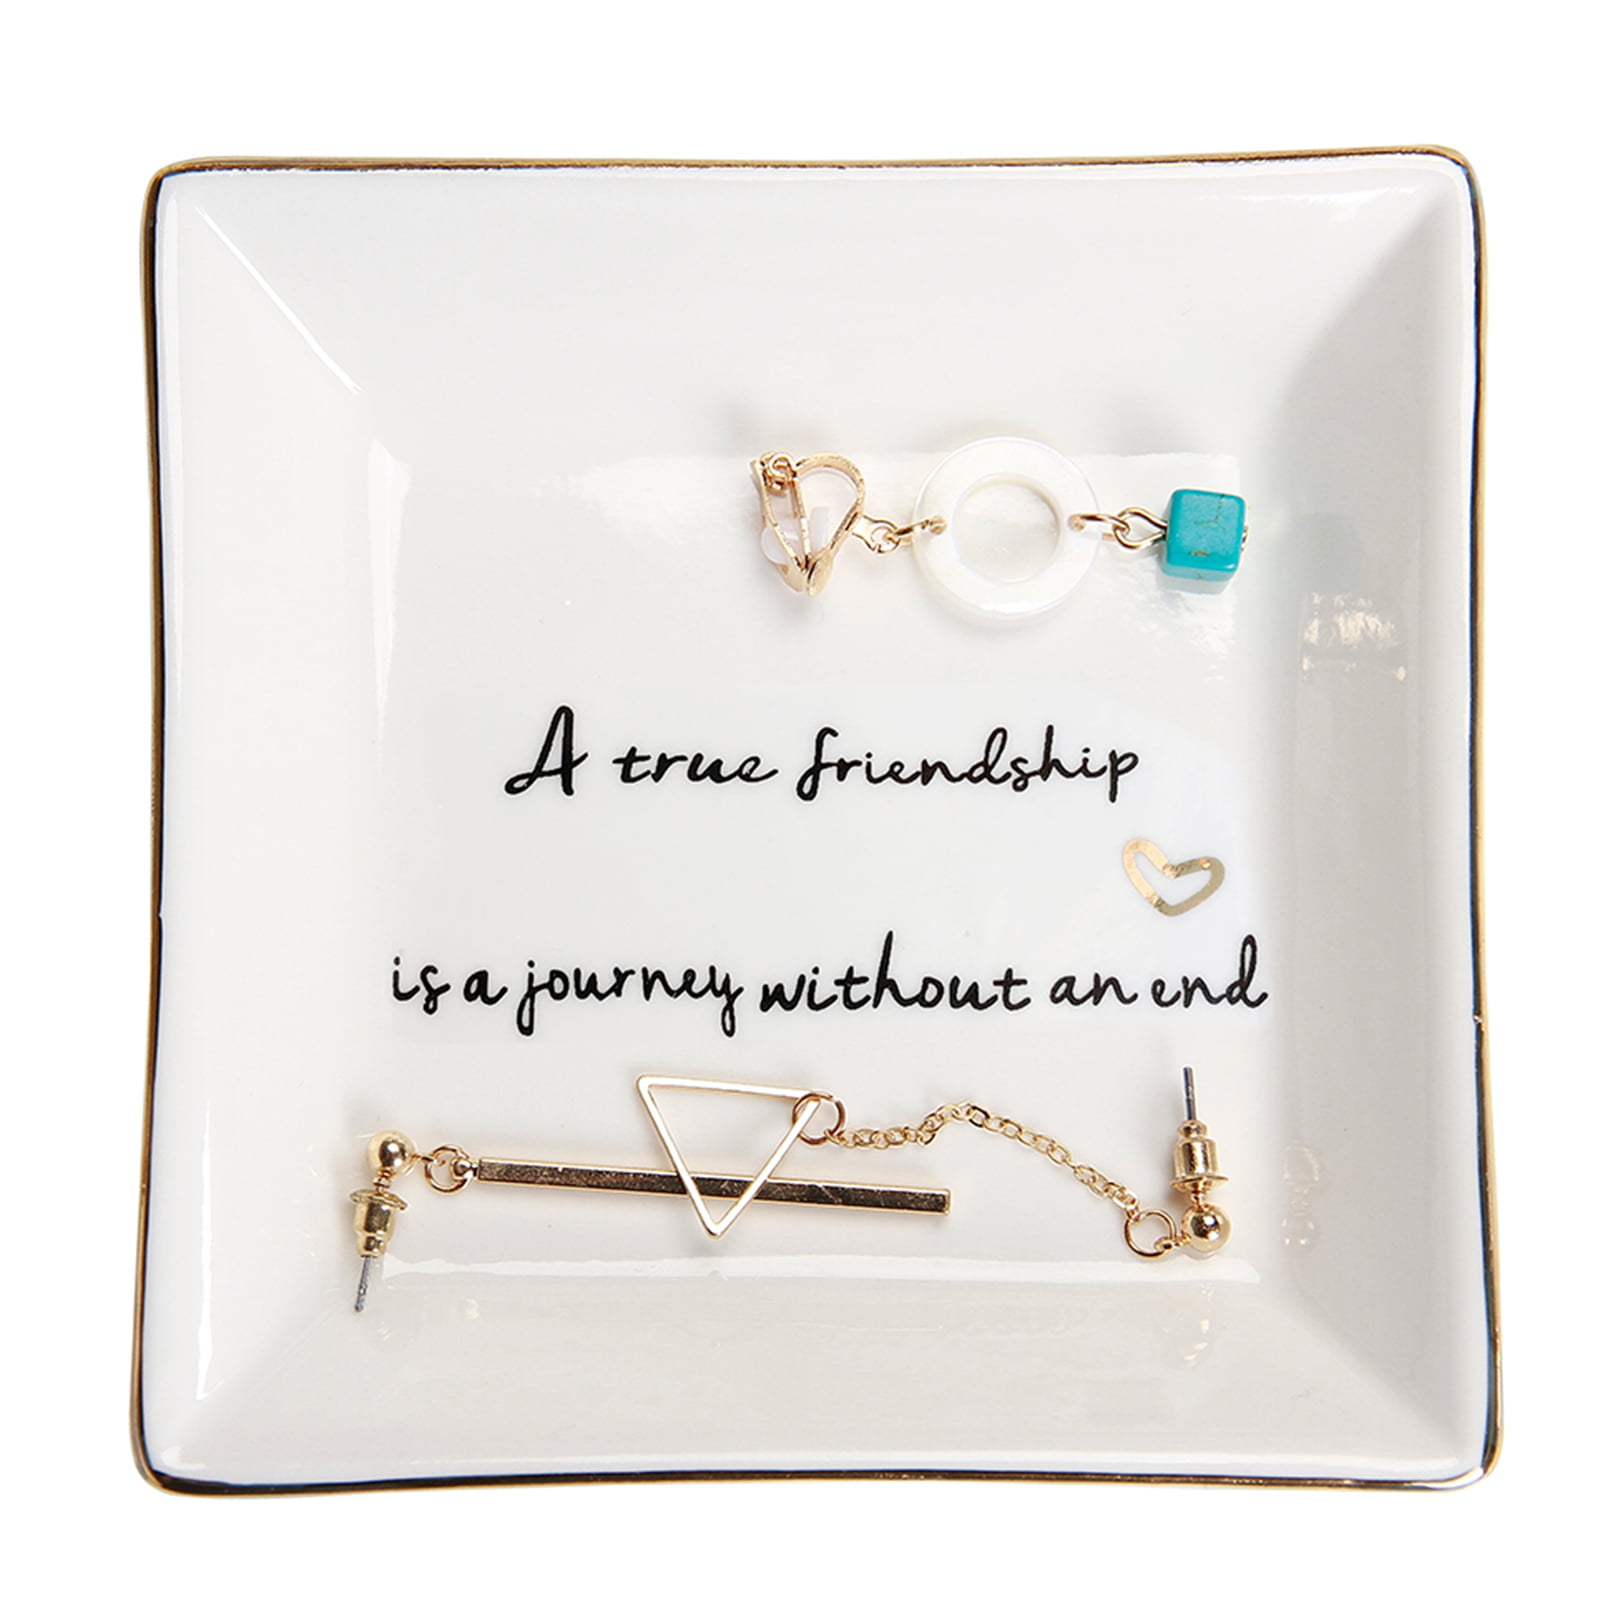 Good Friends Bestie Gifts for Her Women Birthday Christmas Gifts for Best Friends Female Ceramic Jewelry Holder Ring Dish Trinket Tray Friendship Gifts for Women Friends 